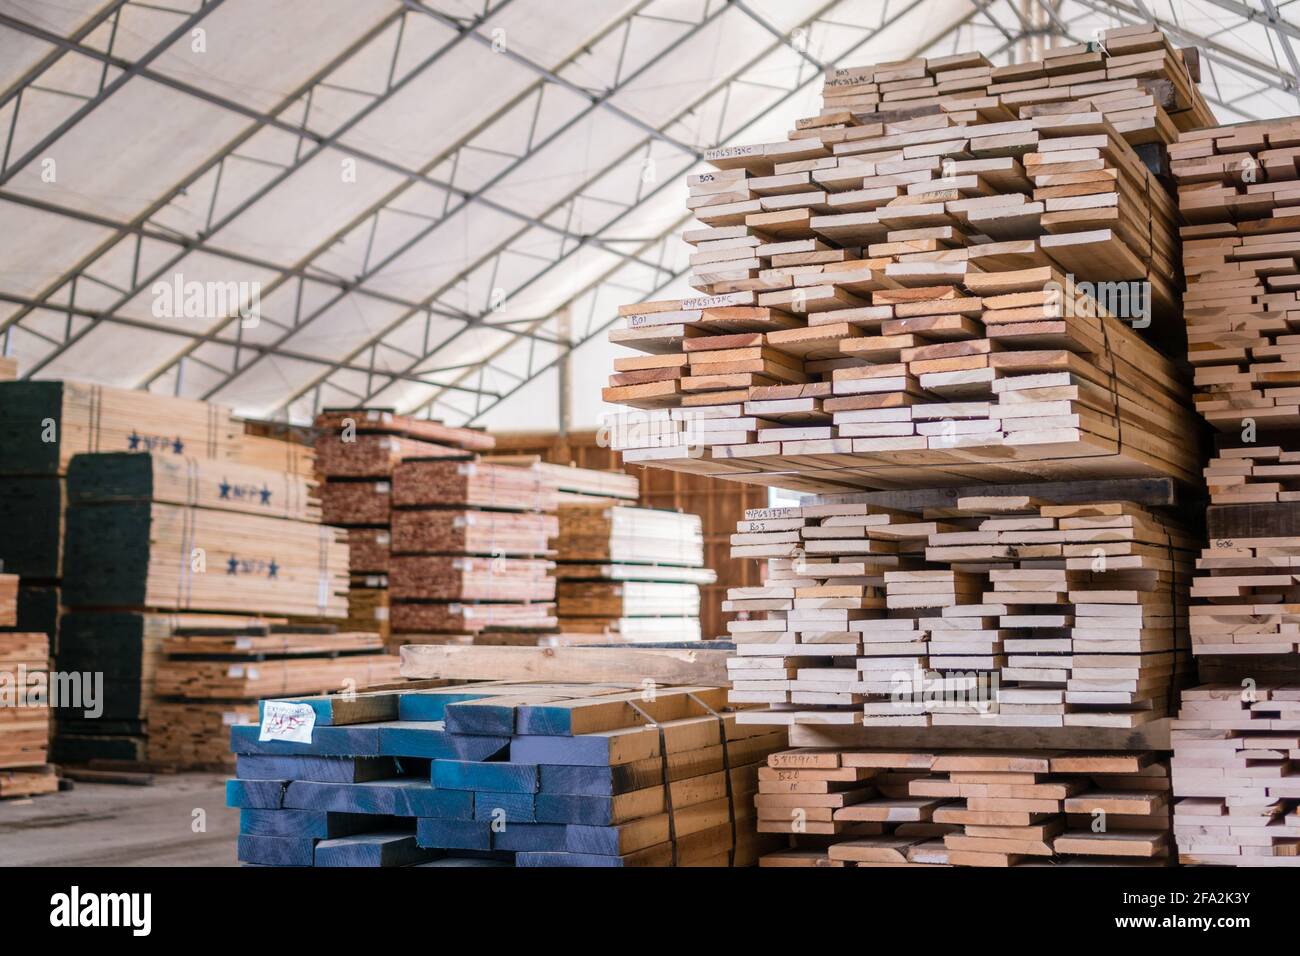 Kingston, NH, US-March 12, 2021: Stacks of lumber on a rack for sale to consumers at a retail hardwood lumber business Stock Photo